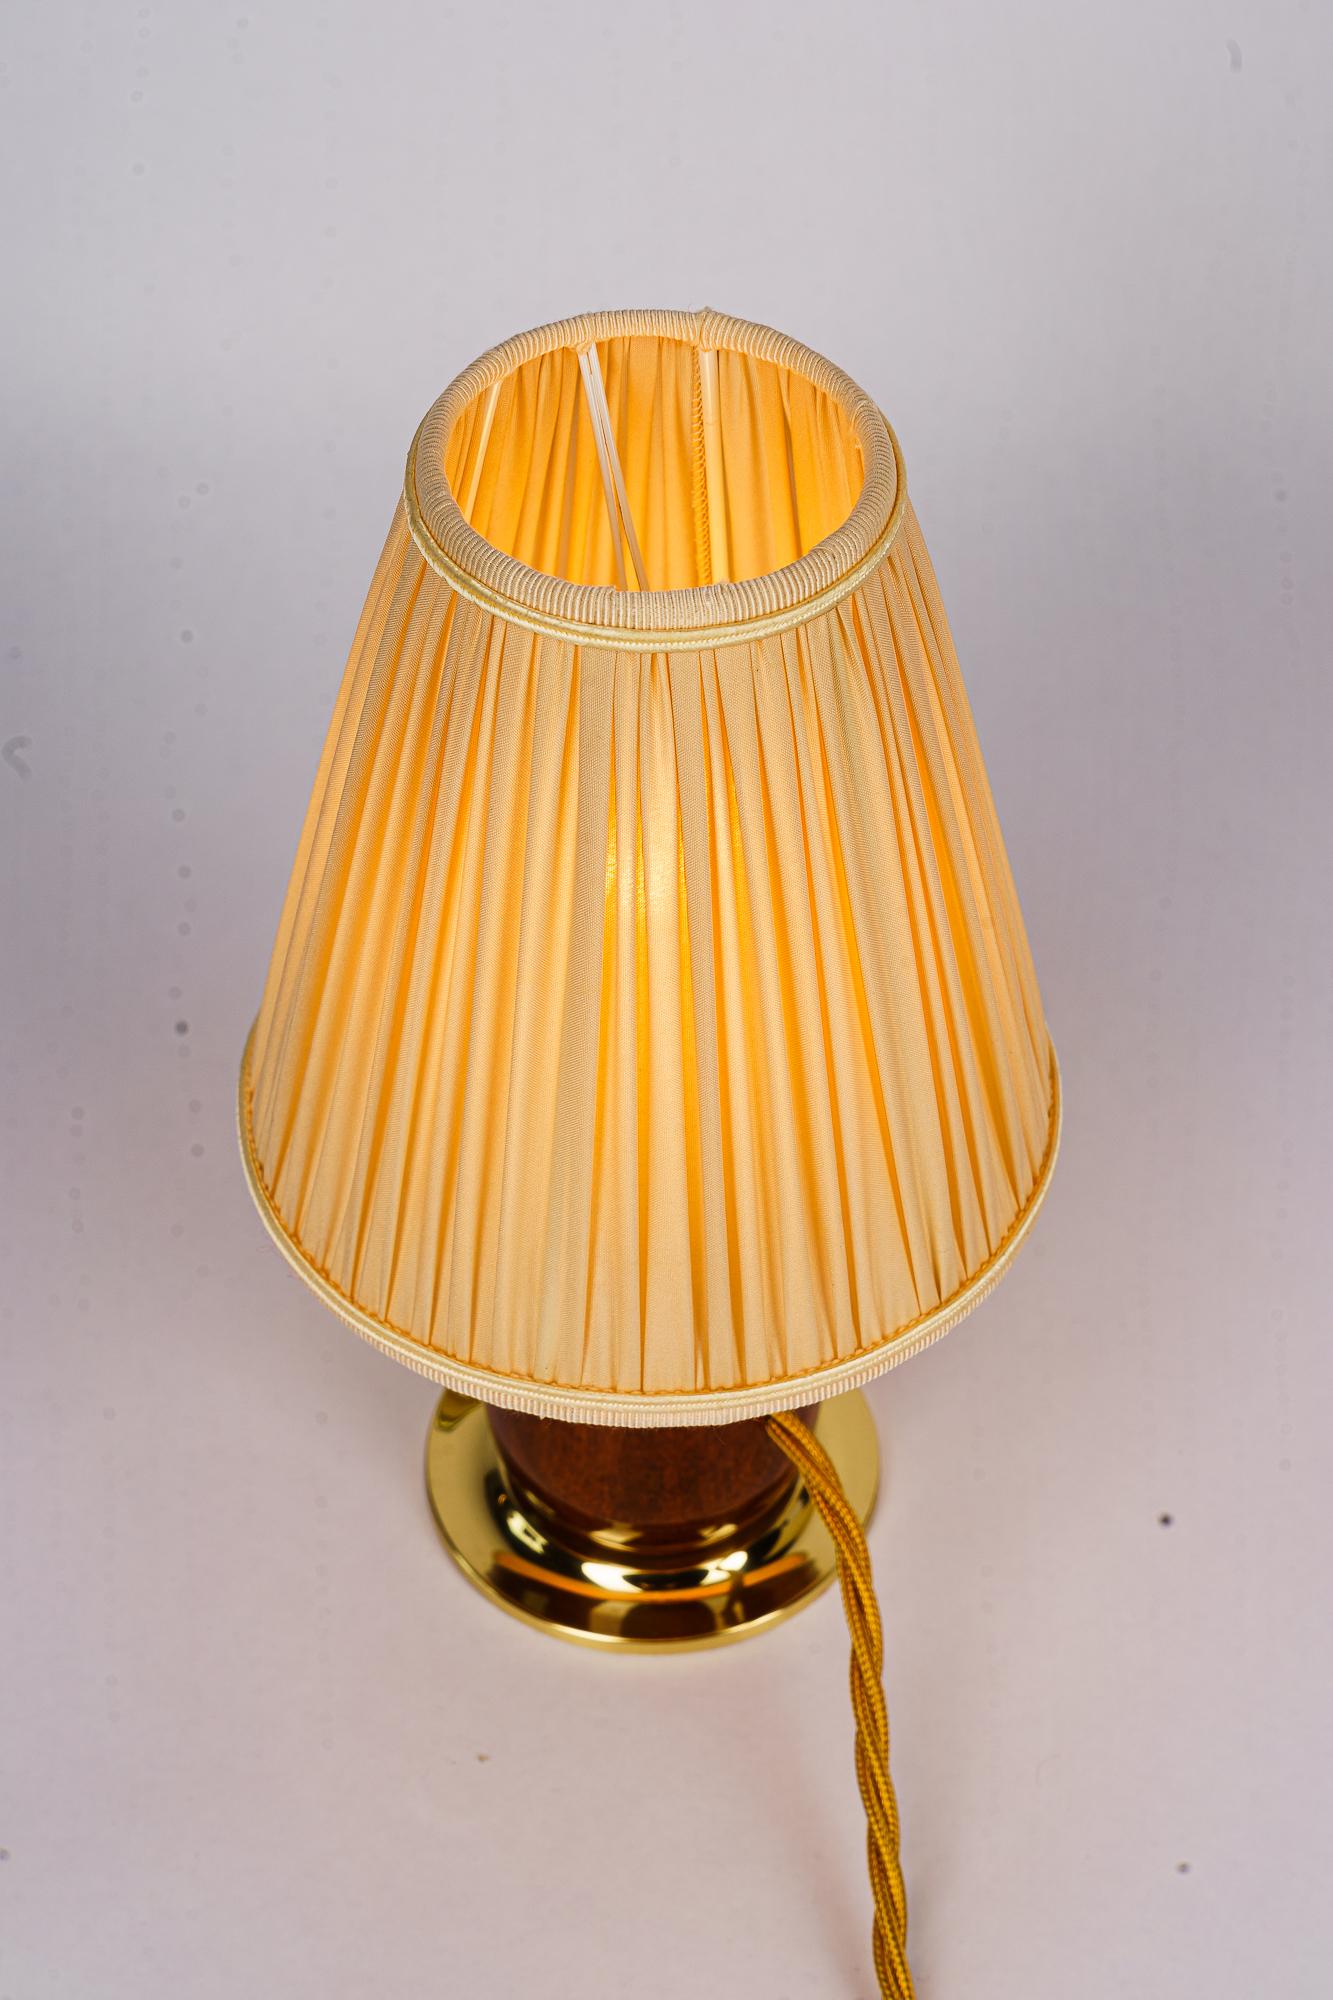 Rupert nikoll cherry wood table lamp with fabric shade vienna around 1950s For Sale 2